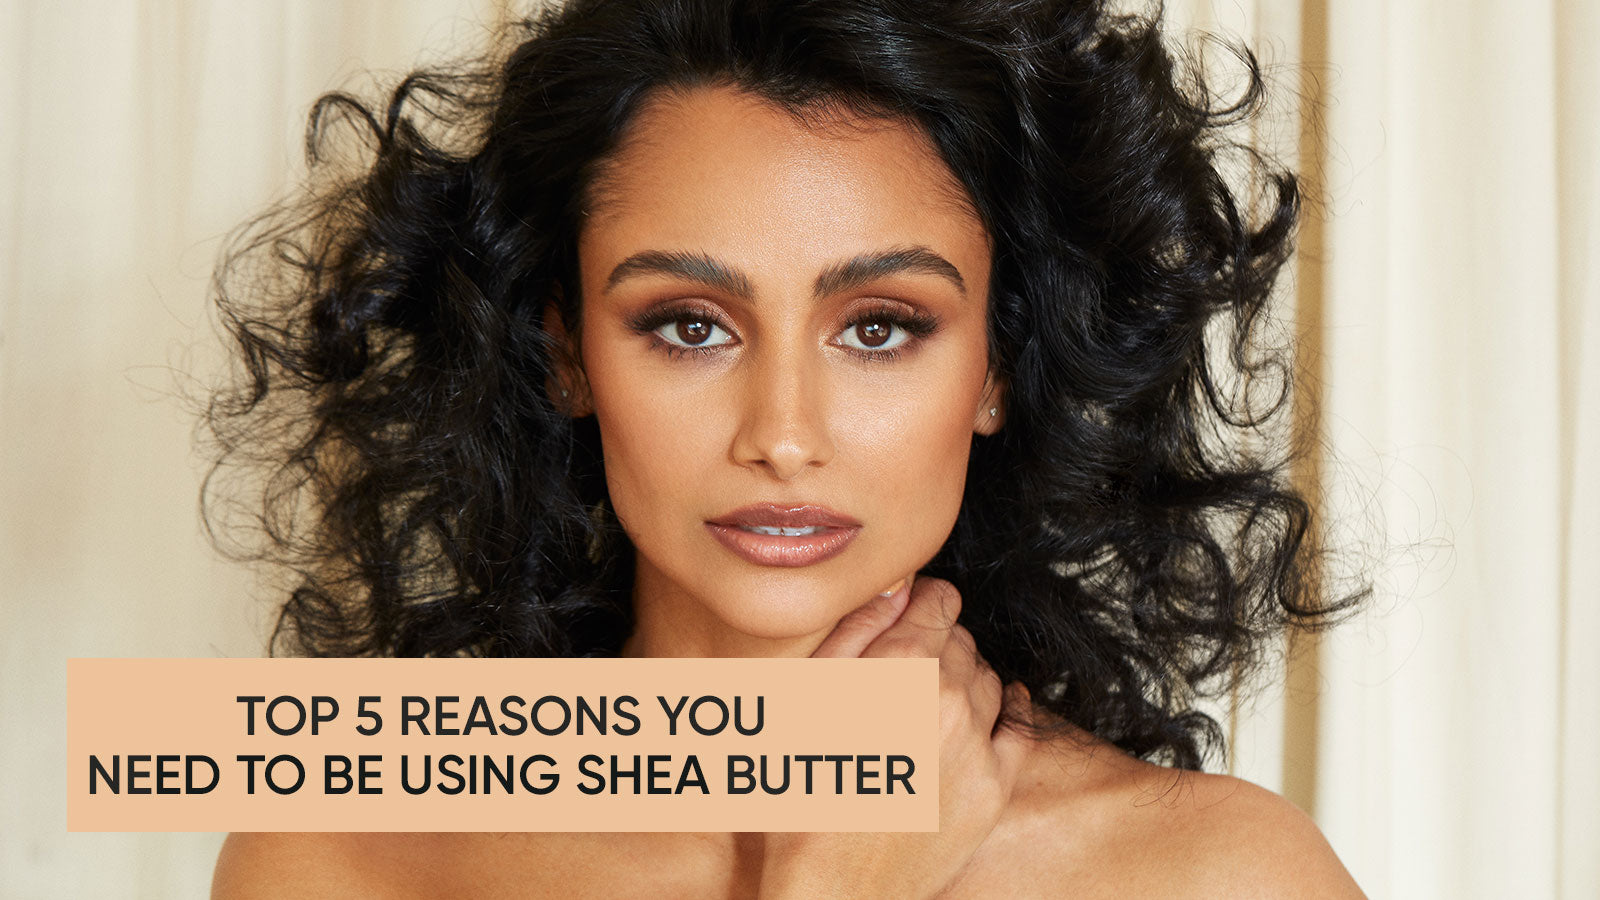 The Top 5 Reasons You Need to Be Using Shea Butter for African American Skin